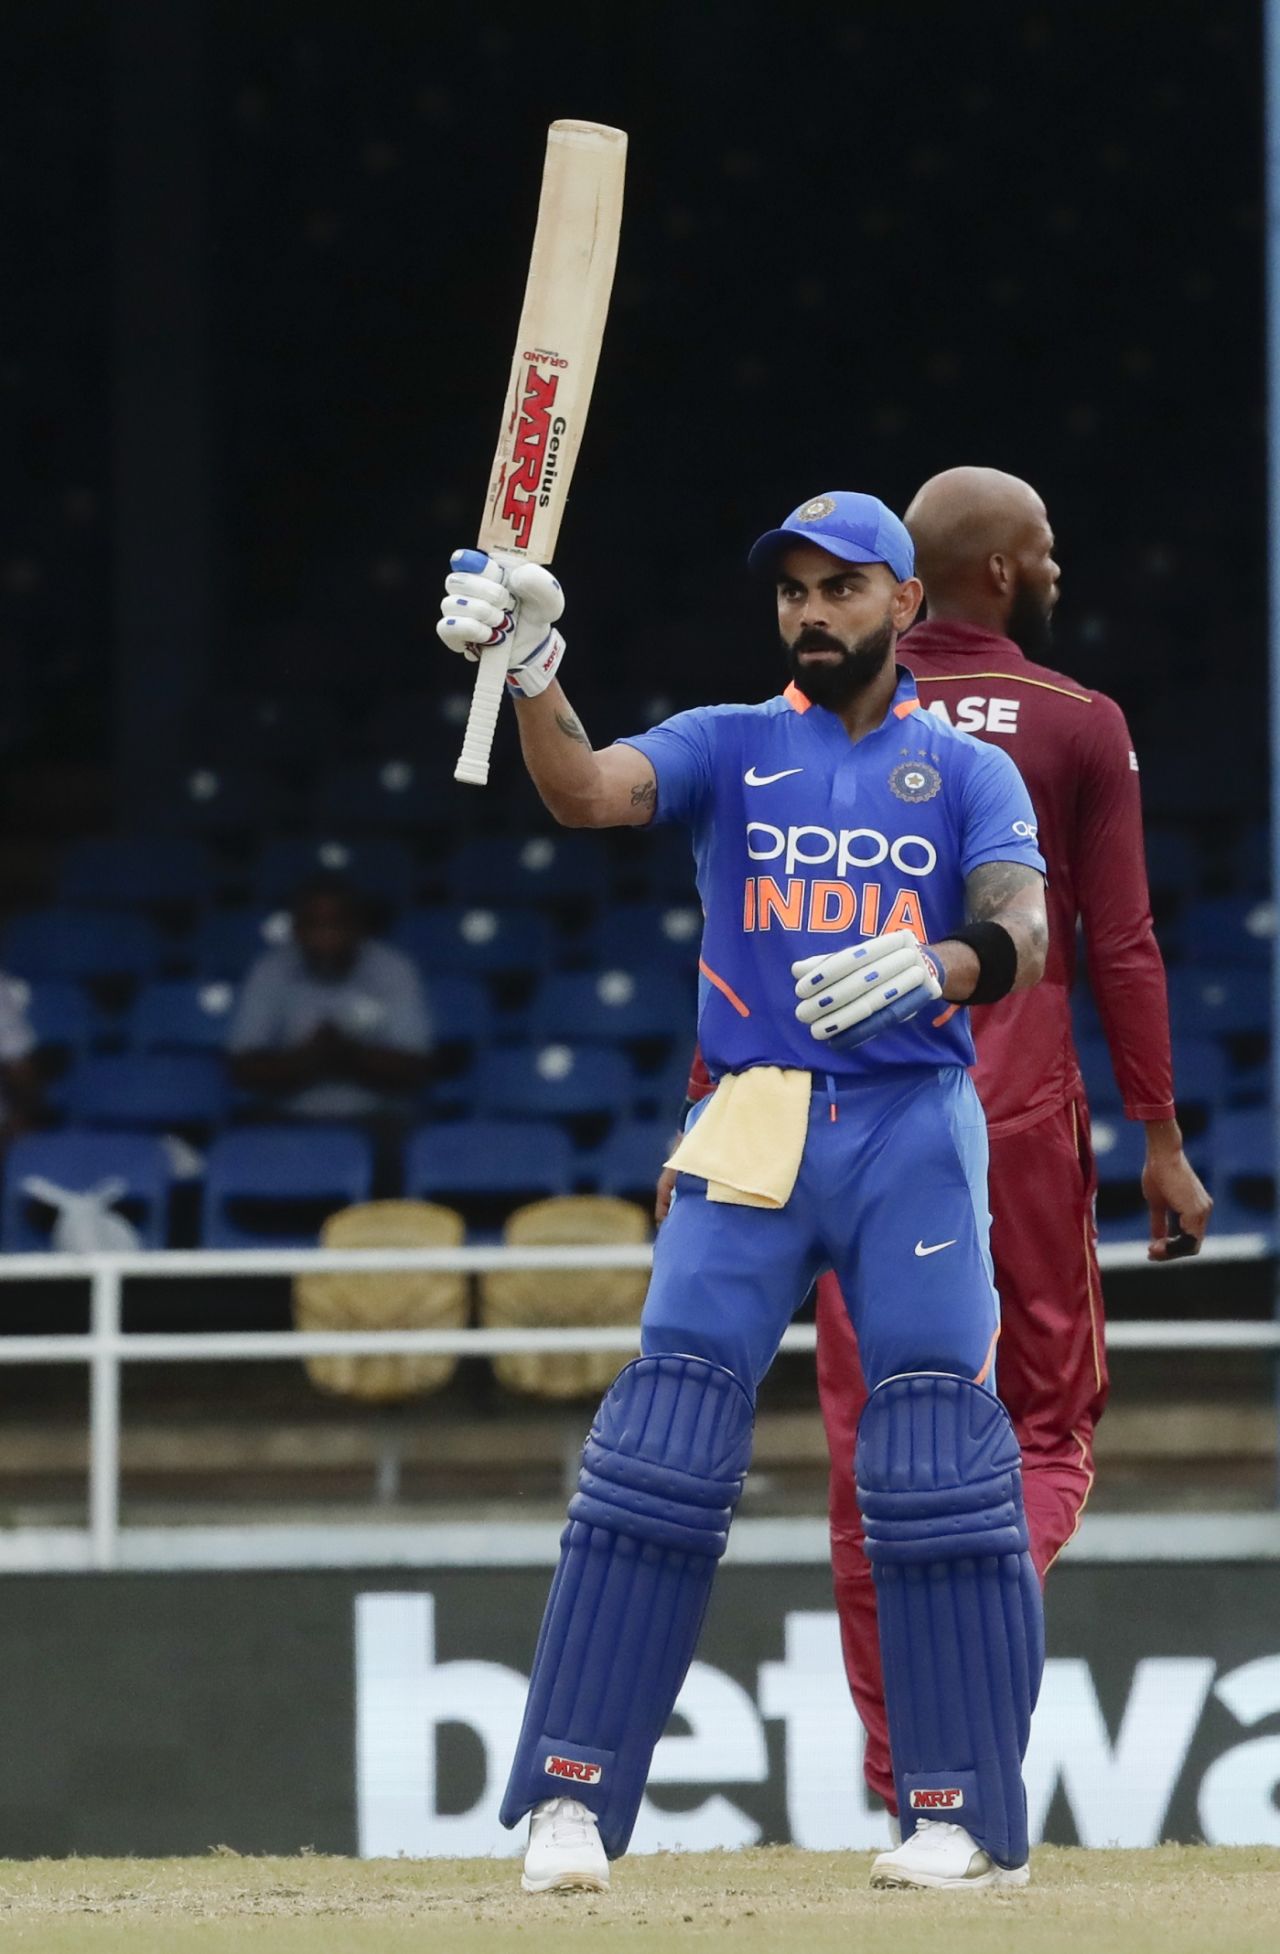 Another day...another landmark for Virat Kohli, West Indies v India, 3rd ODI, Port of Spain, August 14, 2019